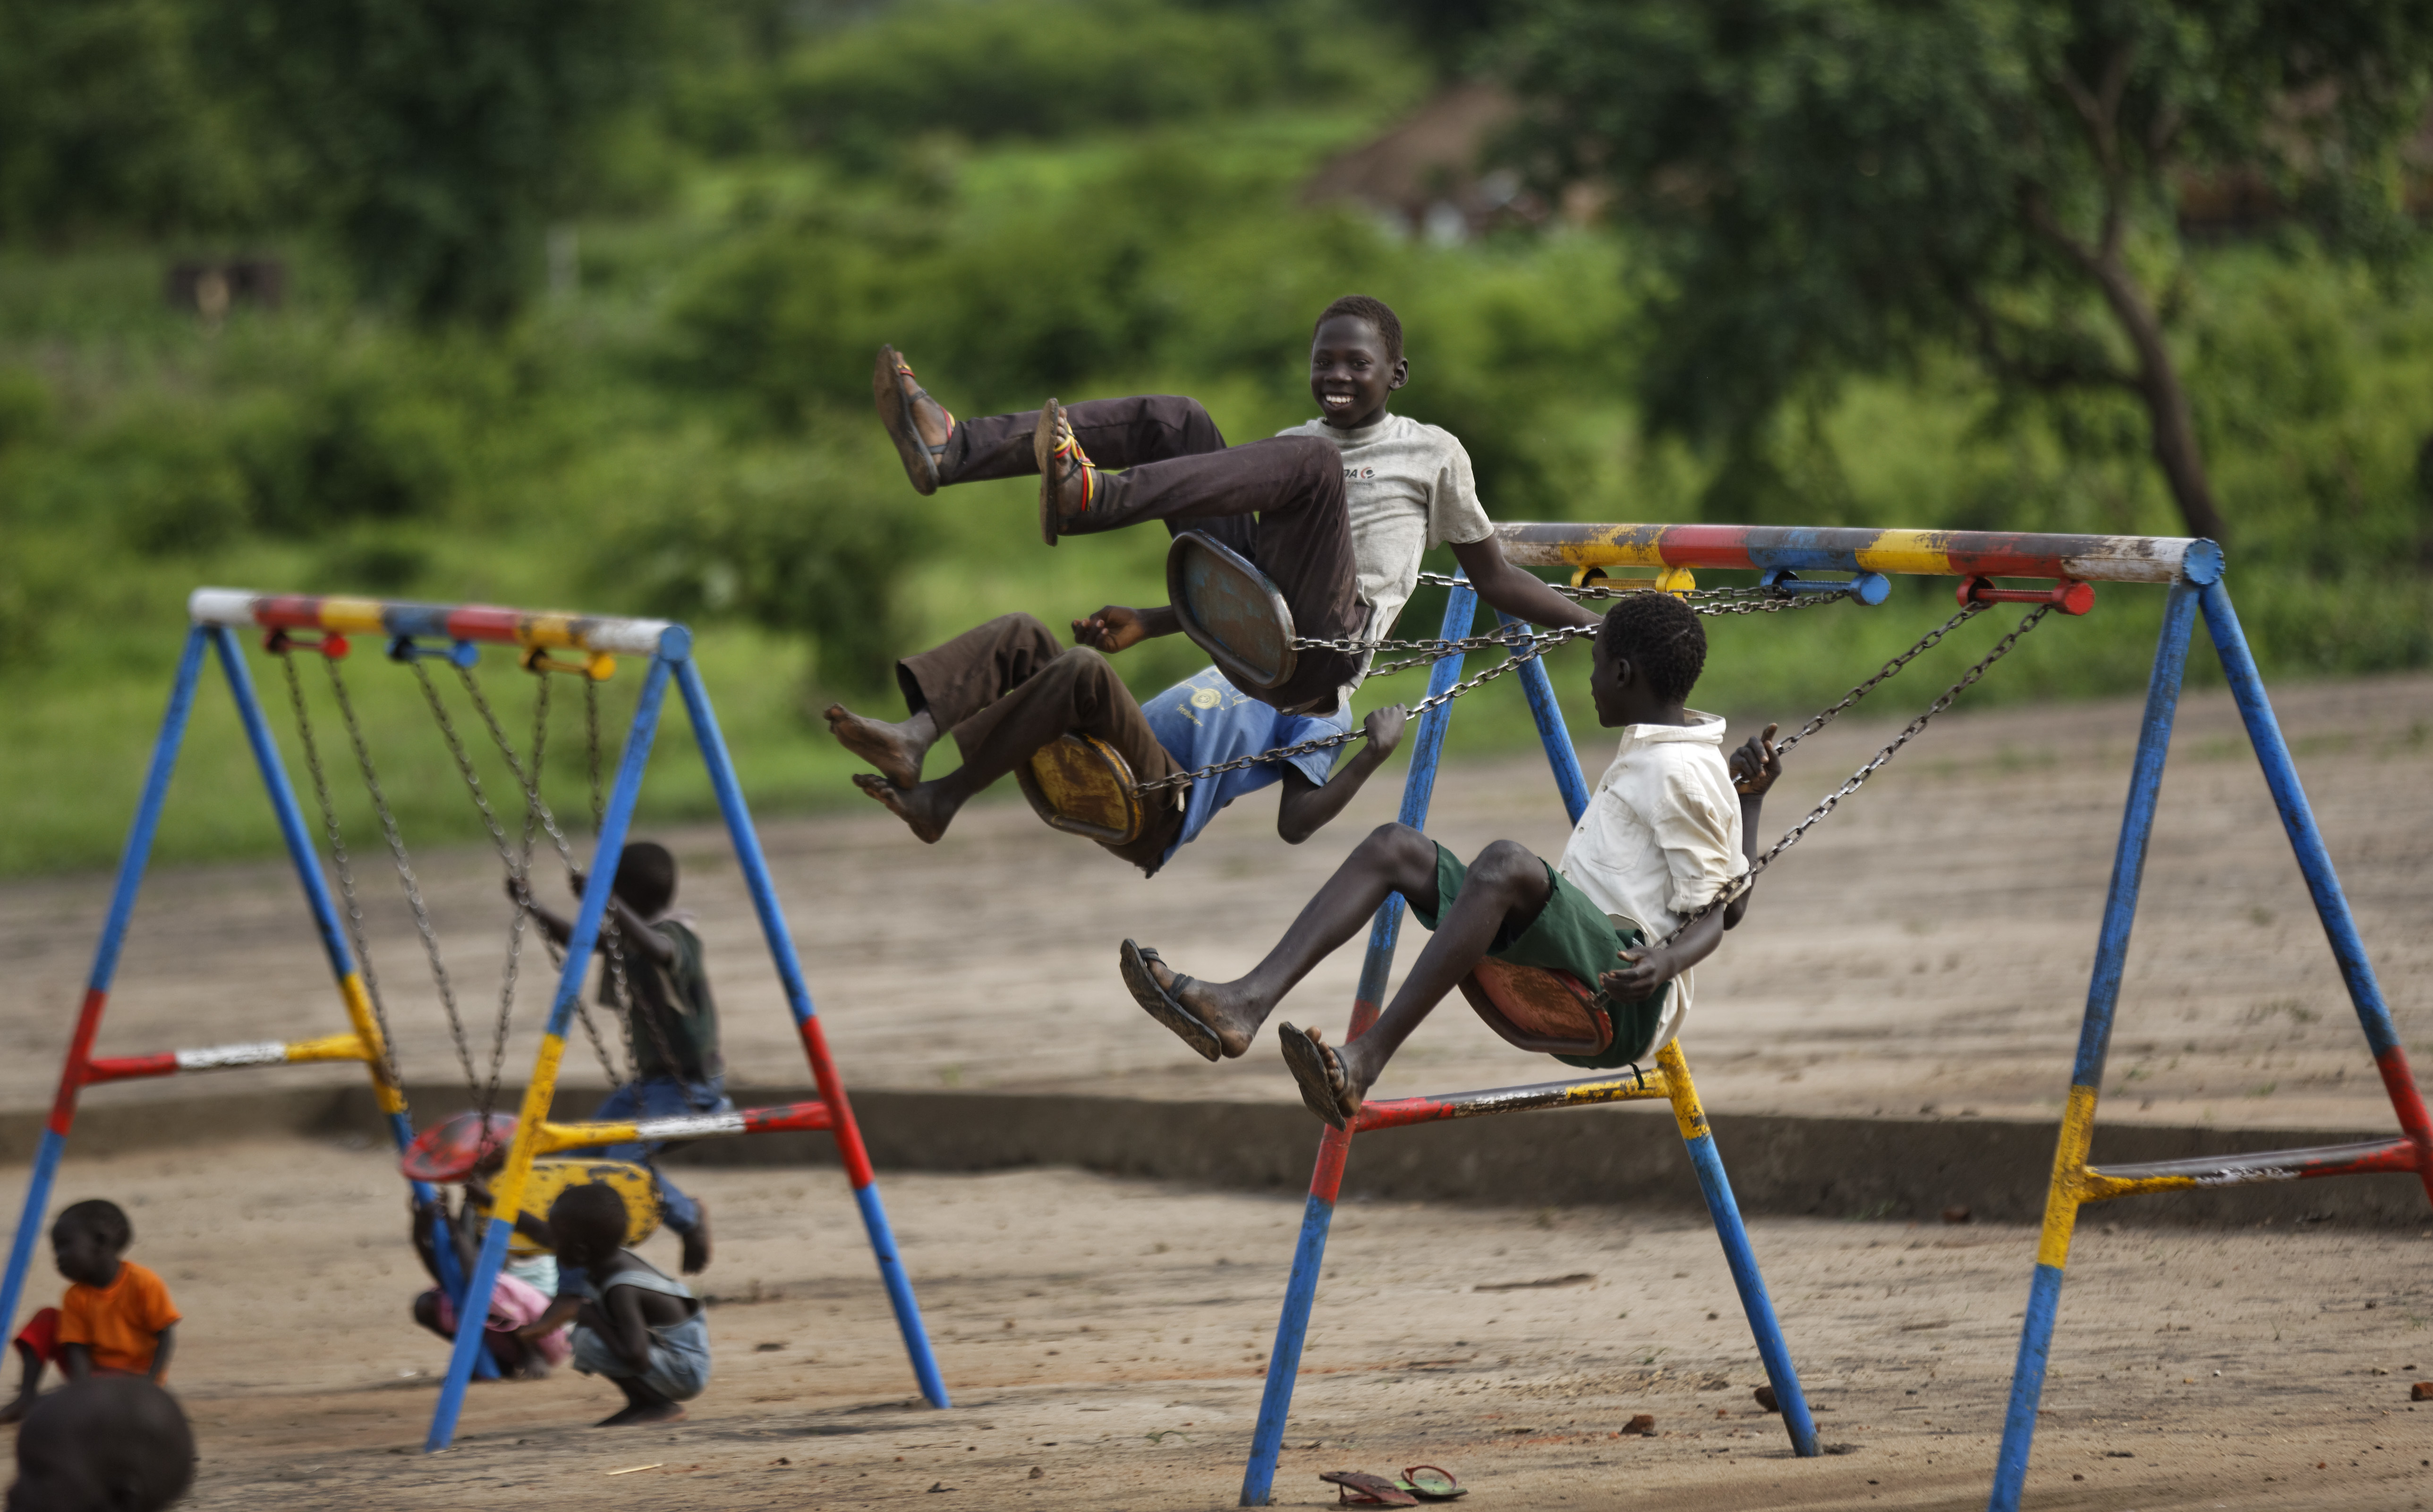 South Sudanese refugee children play on swings during morning break in the yard of the Ombechi nursery school, which has over 500 pupils and is supported by UNICEF and Save the Children, in Bidi Bidi, Uganda Wednesday, June 7, 2017. Bidi Bidi is a sprawling complex of mud-brick houses that is now the world's largest refugee settlement holding some of those who fled the civil war in South Sudan, which has killed tens of thousands and driven out more than 1.5 million people in the past three years, creating the world's largest refugee crisis. (AP Photo/Ben Curtis)